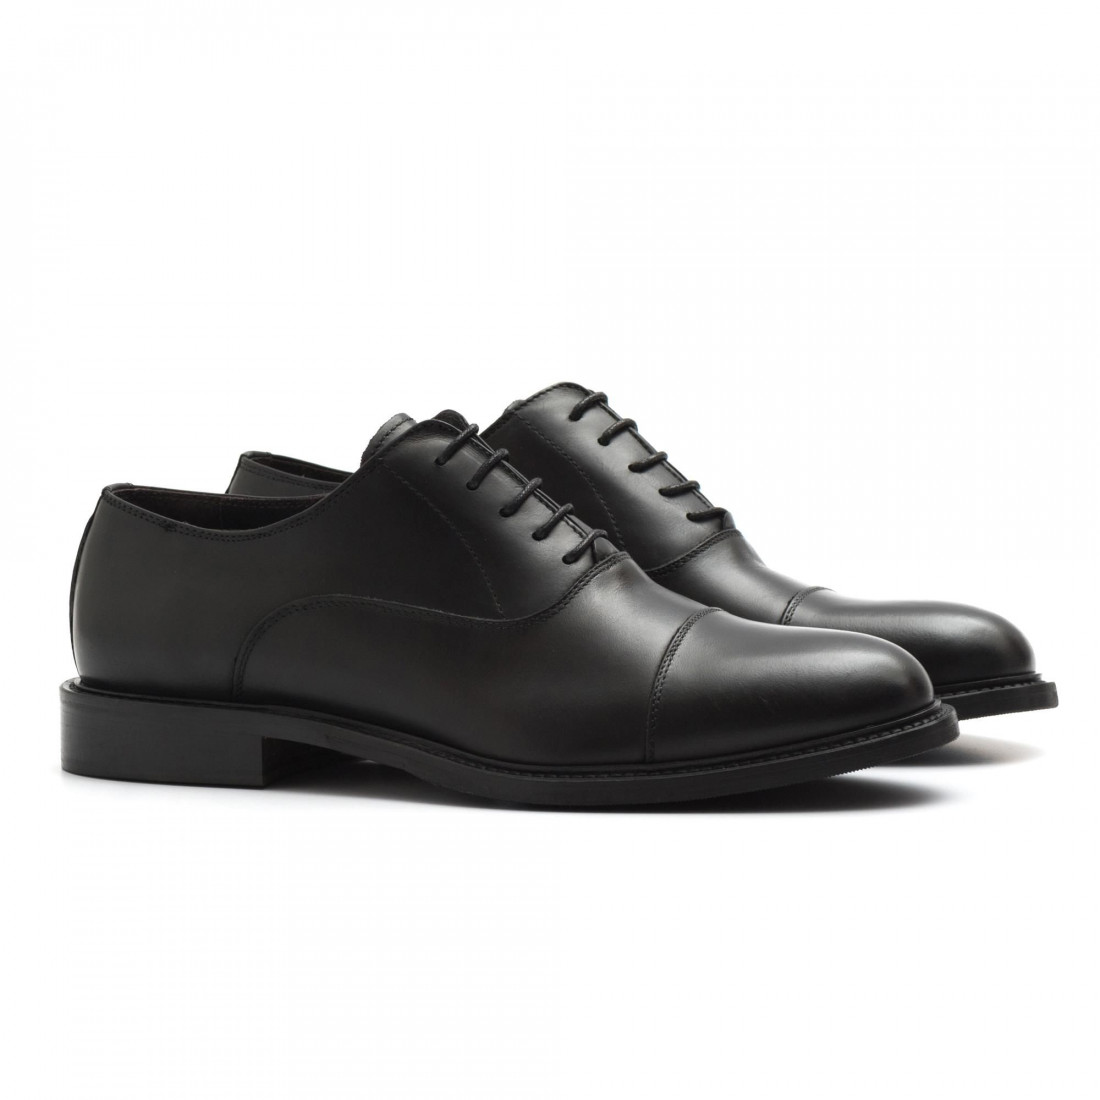 Oxford shoes in smoth black leather